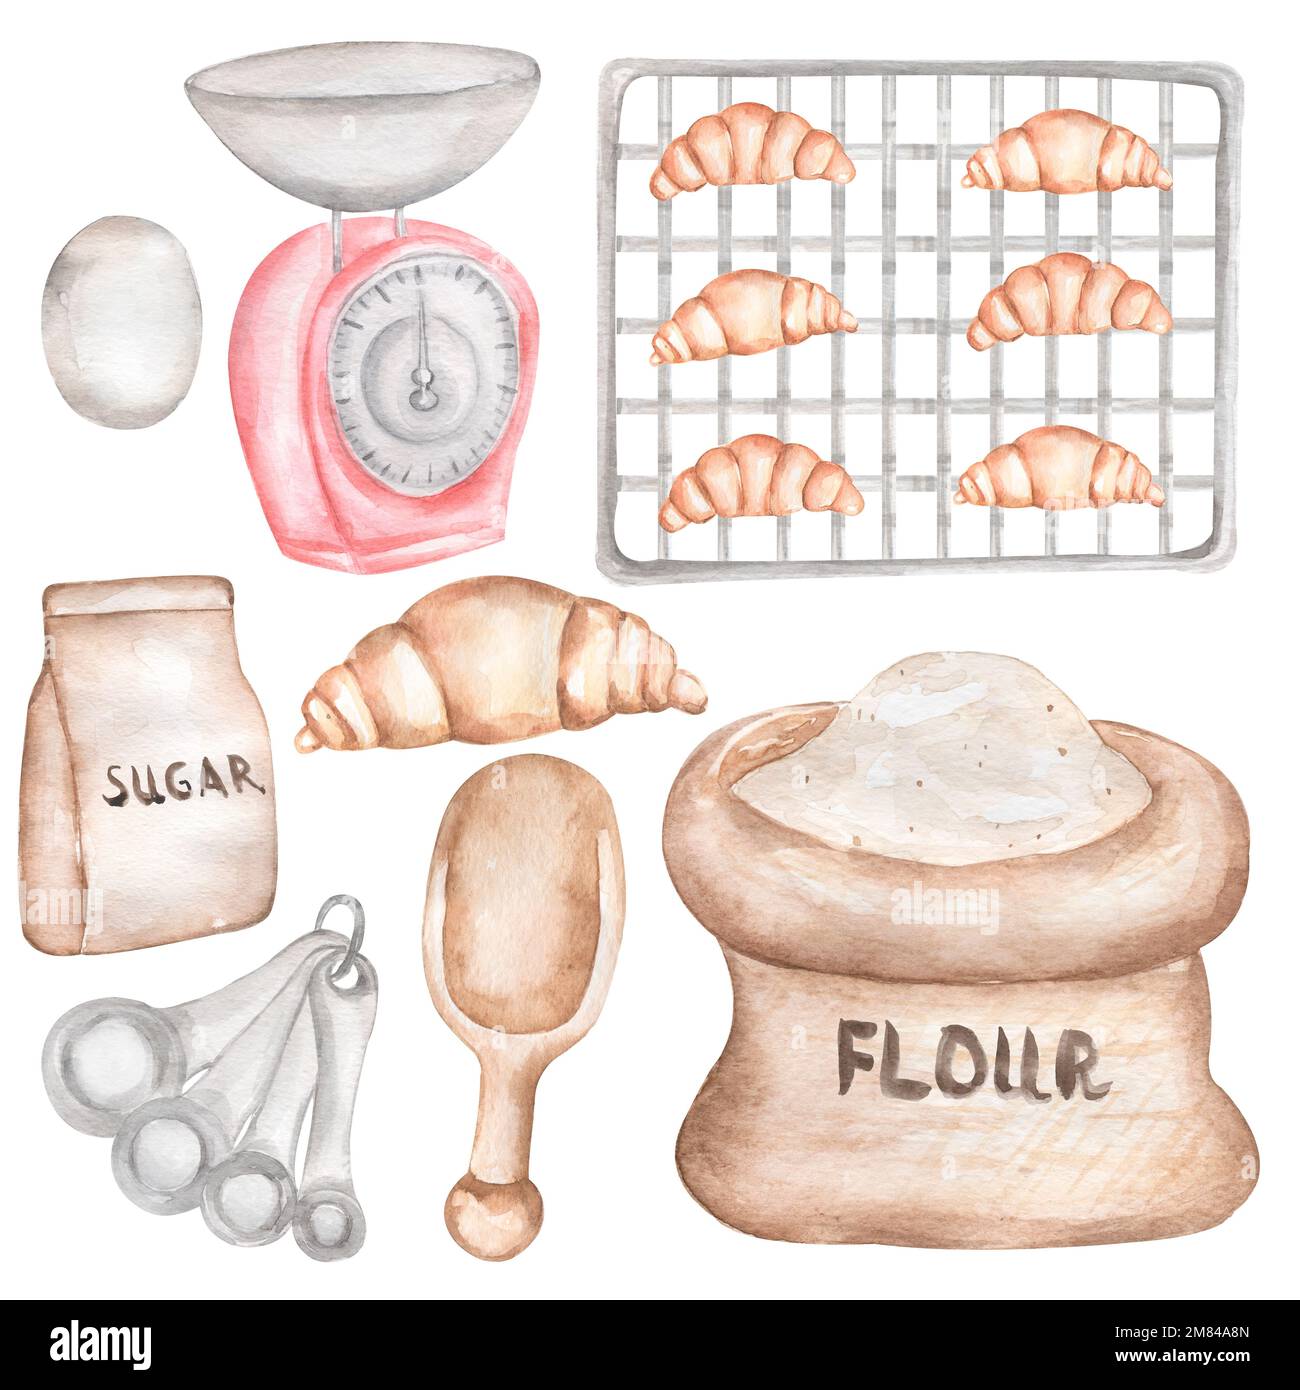 Bakery Watercolor Clipart, Kitchen Baking Tools and Supplies